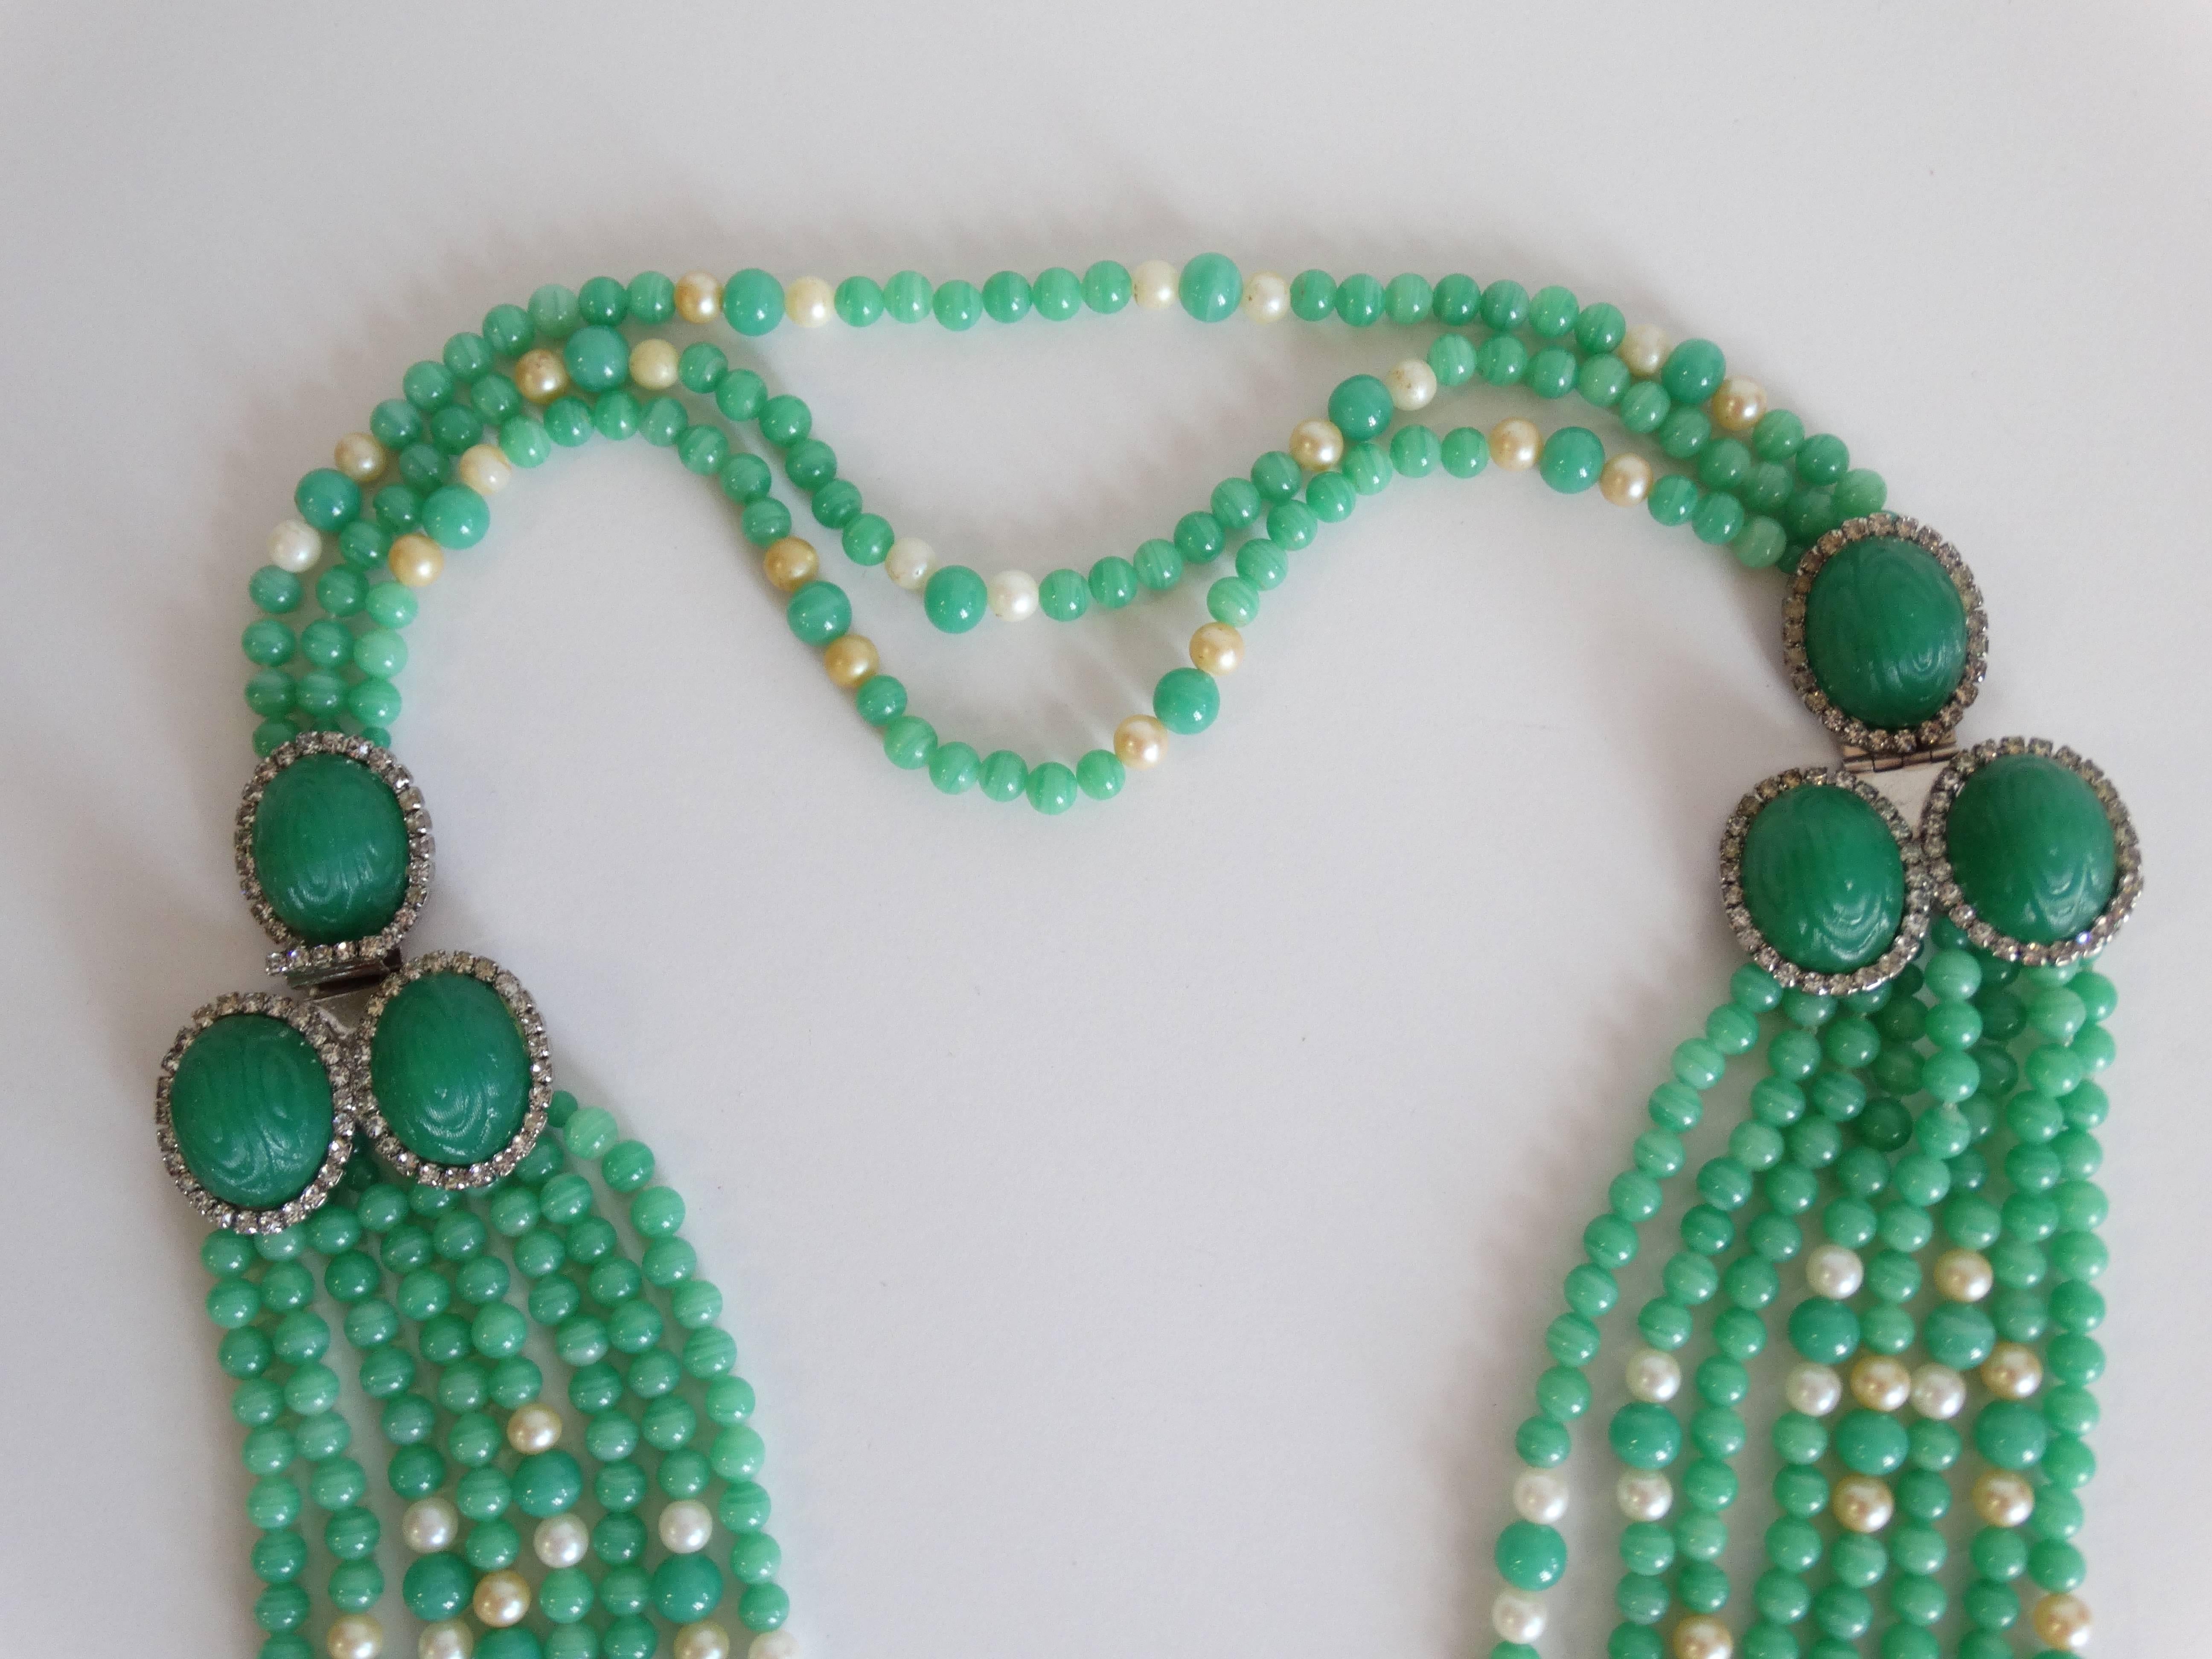 1970's William de Lillo 8 strand necklace made of Jade and faux Pearls! Double side clasp clusters of green cameo glass surrounded by crystal rhinestones. Faux pearls are speckled through out. Signed del Lillo  a very elegant piece. On the back 3